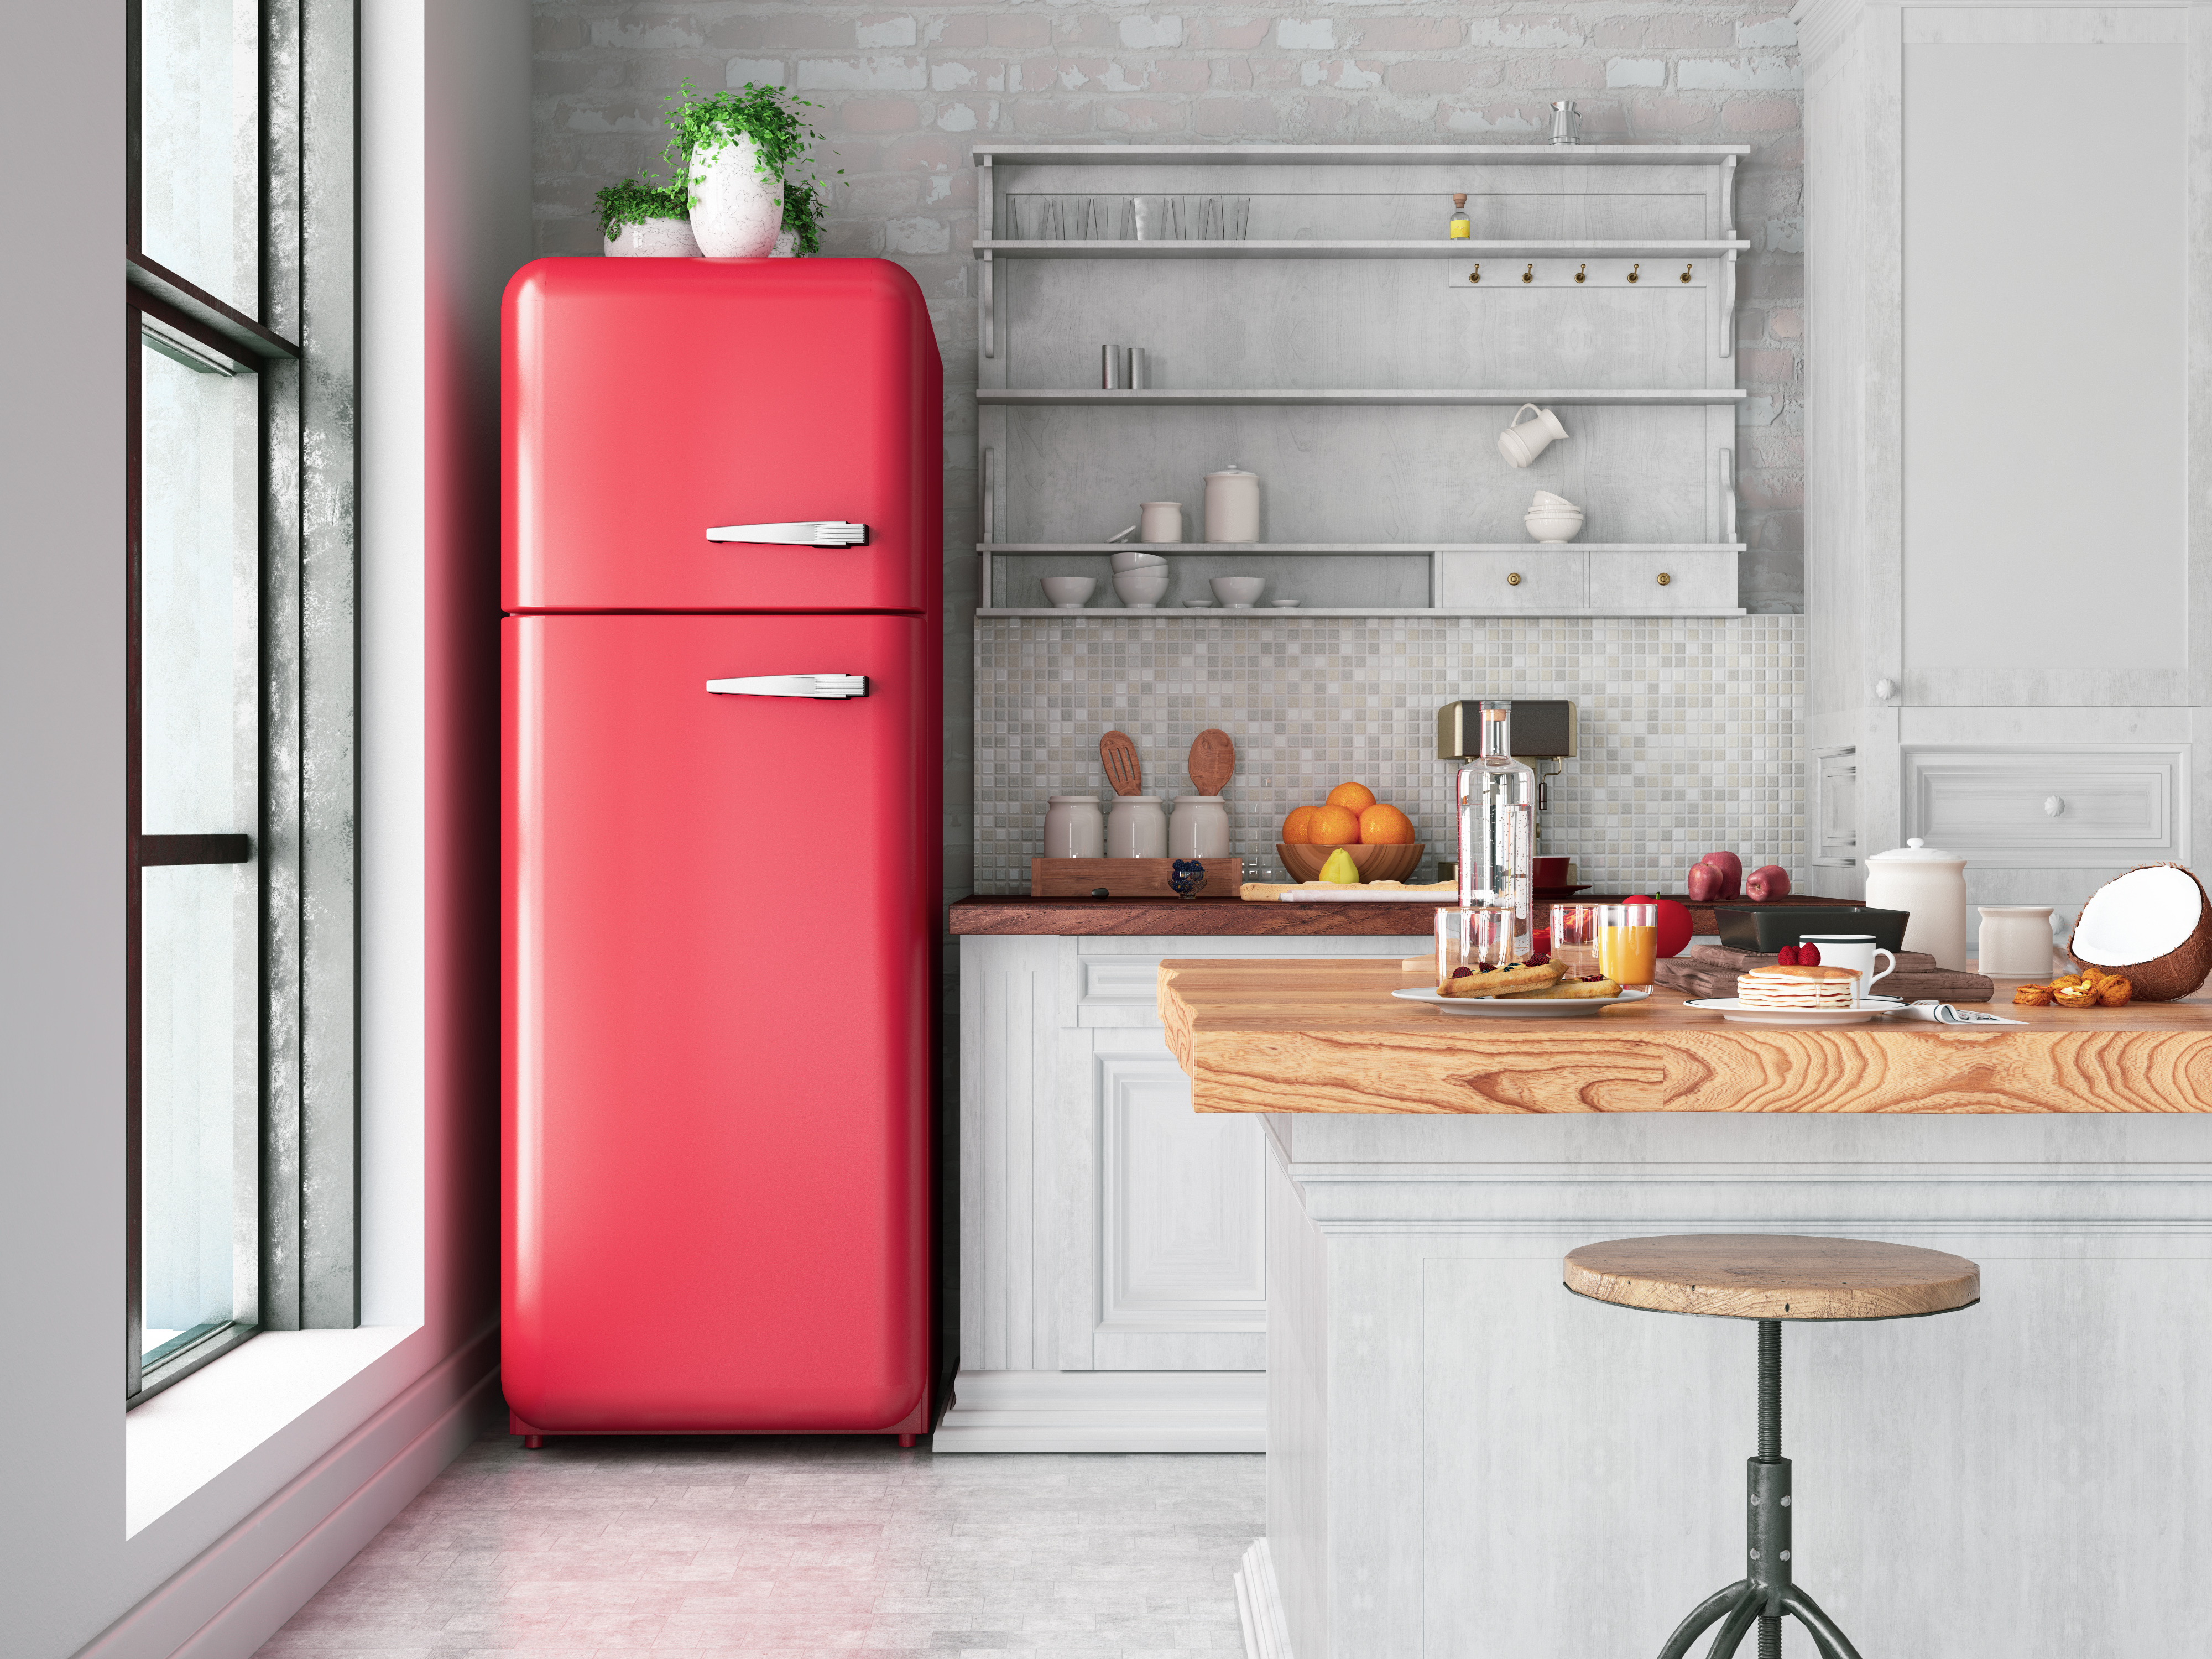 Innovative Appliances From SMEG - An Important Category During The